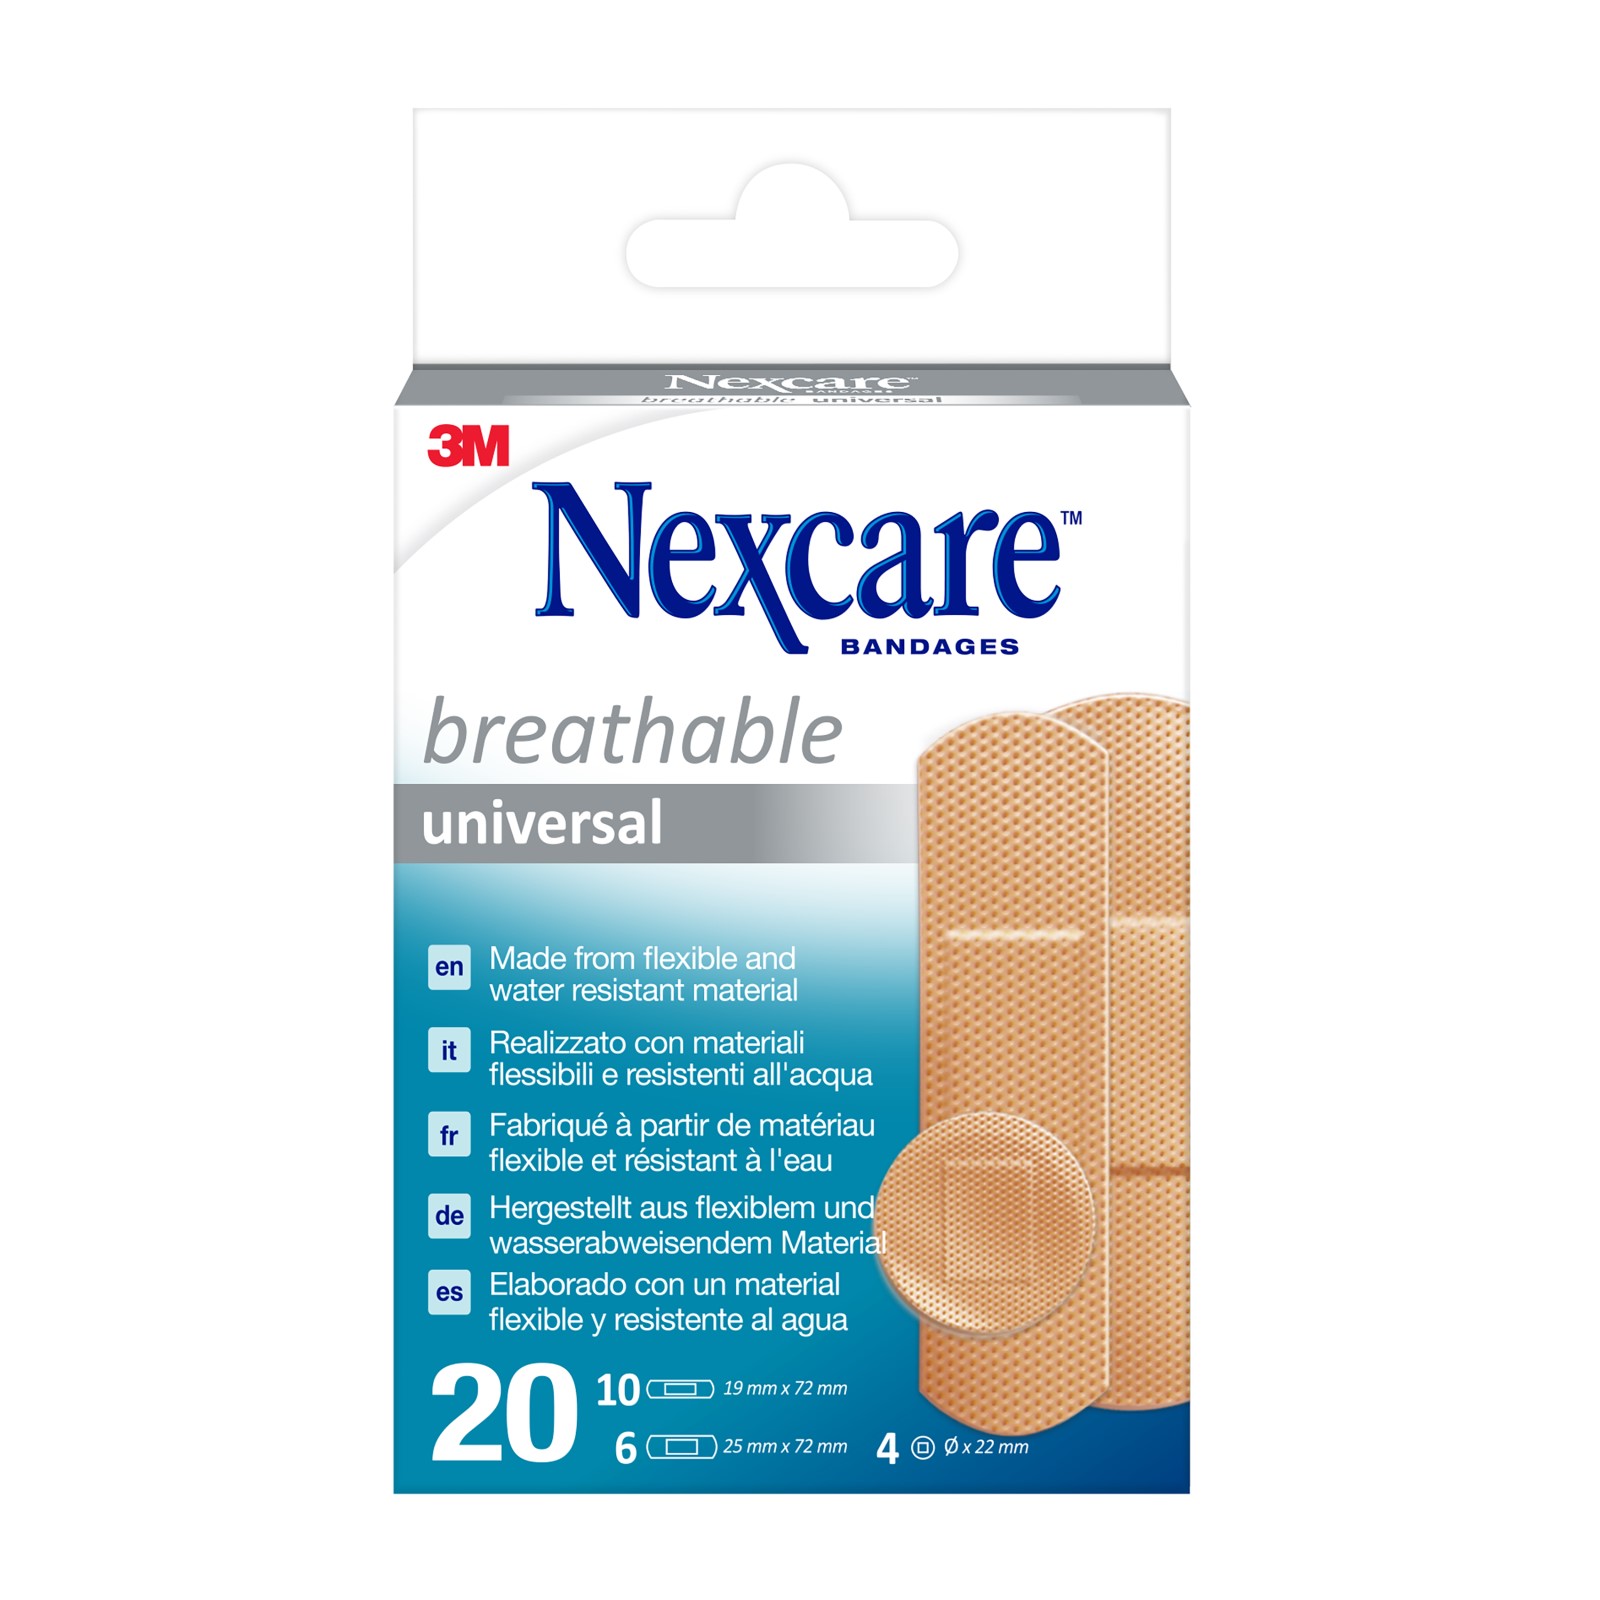 Nexcare™ Breathable Universal Pflaster, assortiert, 20/Packung